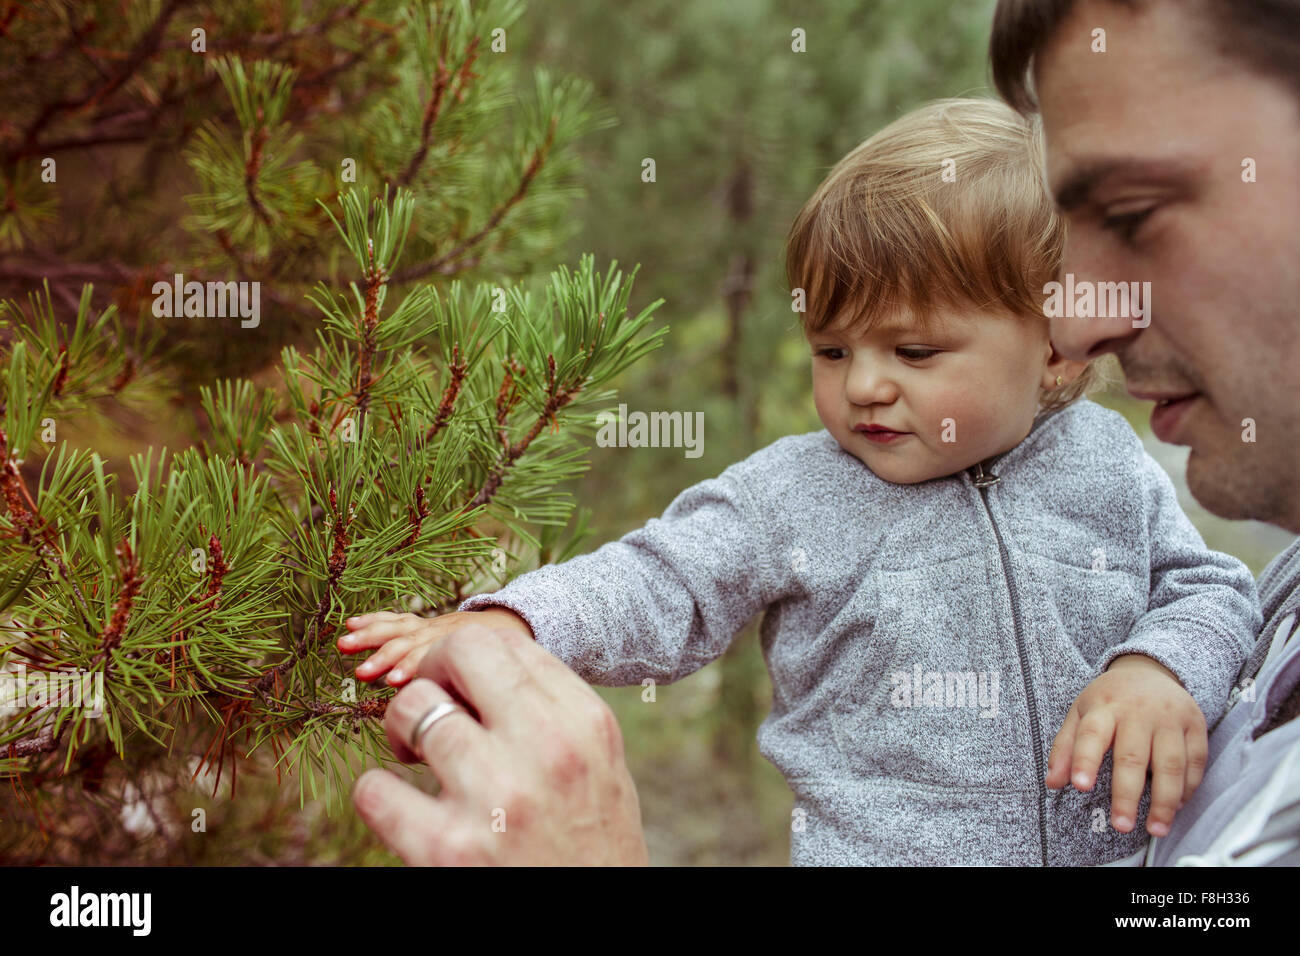 Father and daughter examining pine tree Stock Photo